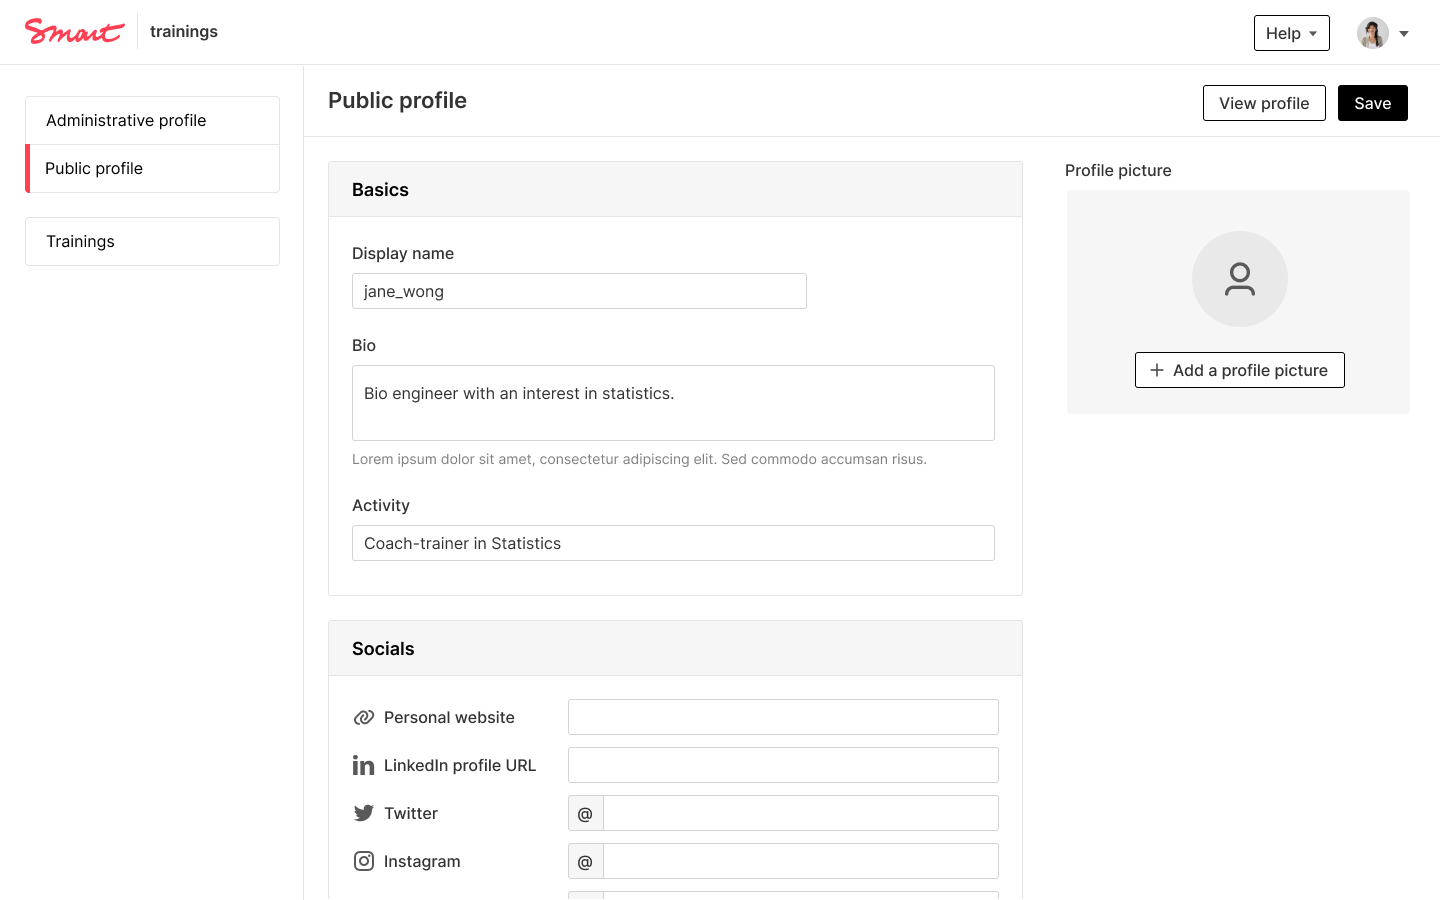 Screenshot of an application layout showing a public profile